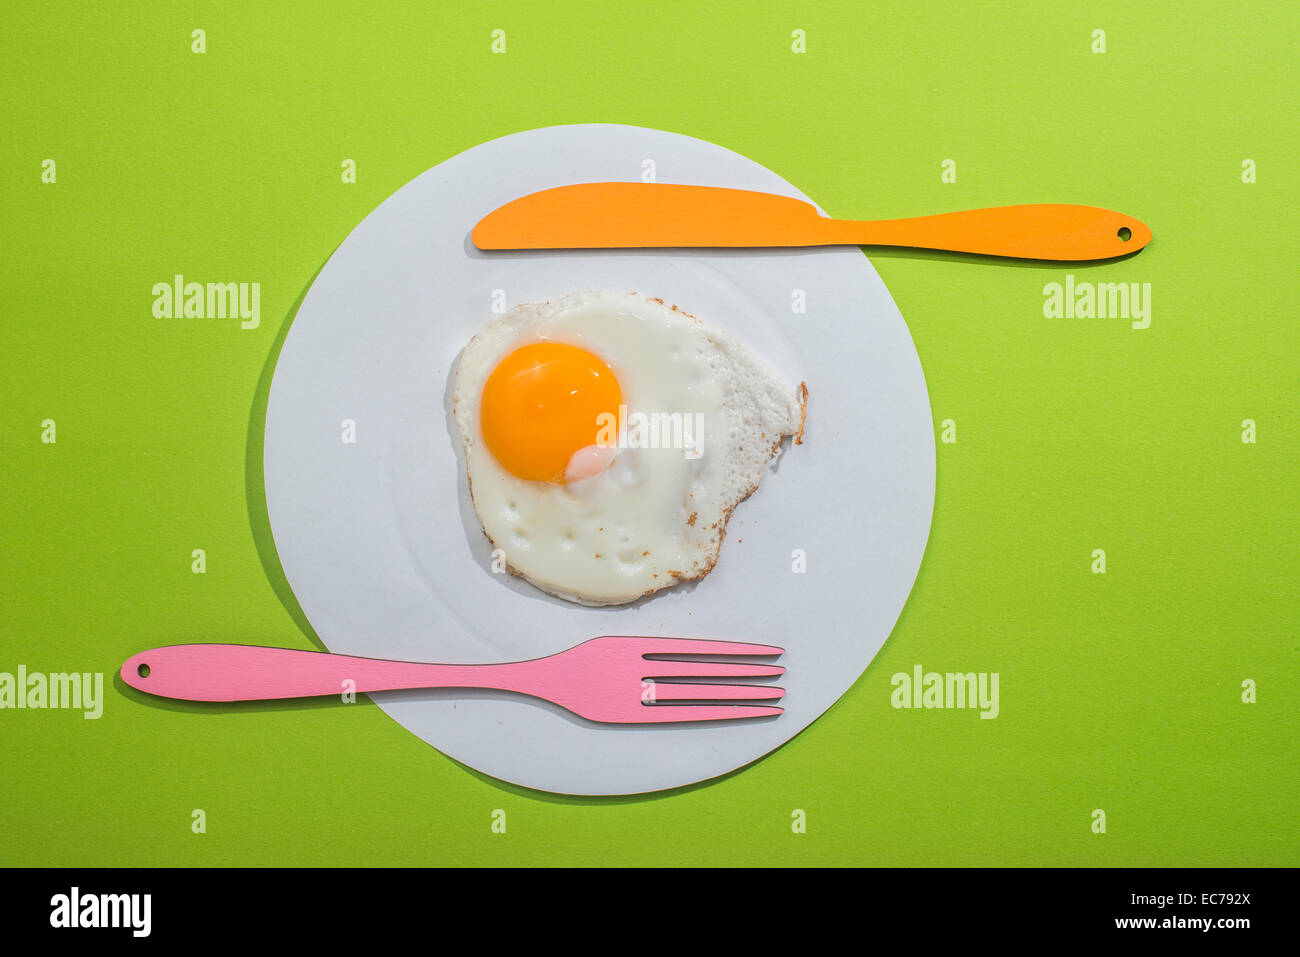 Food concept with paper dish and egg Stock Photo